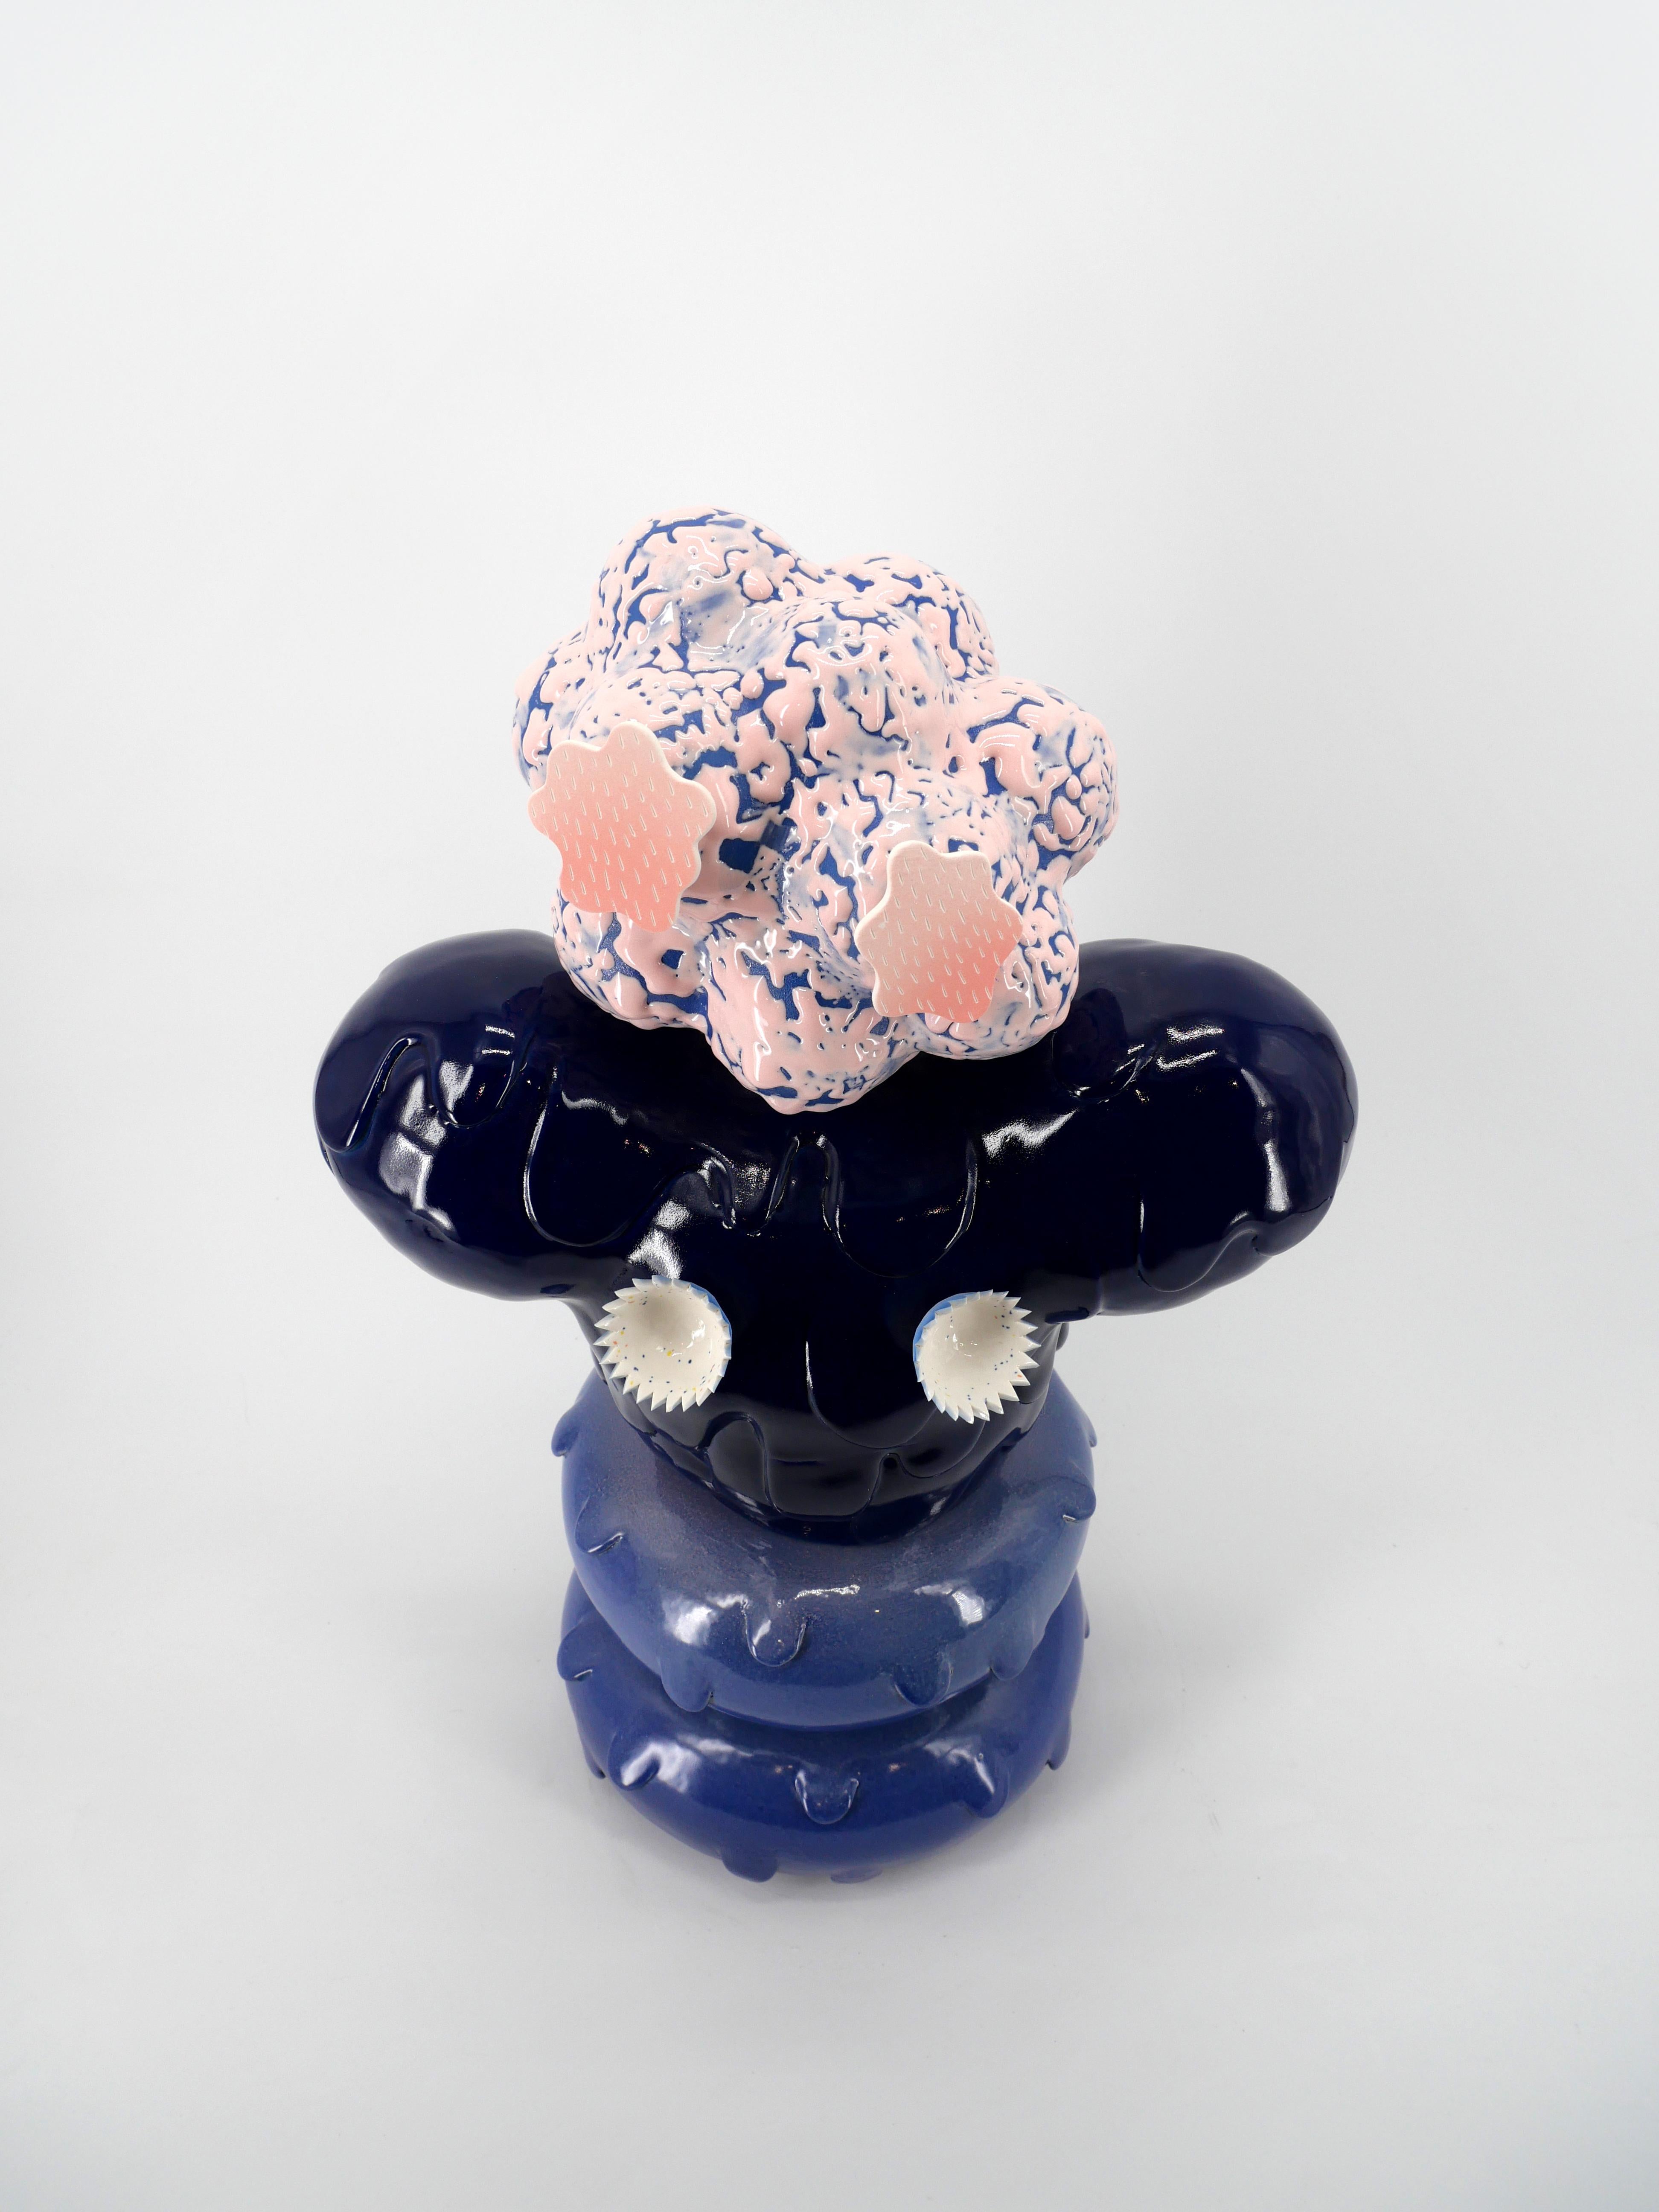 Melting Koala Playful Monster Ceramic Decorative Sculpture by Kartini Thomas In New Condition For Sale In Amsterdam, NL